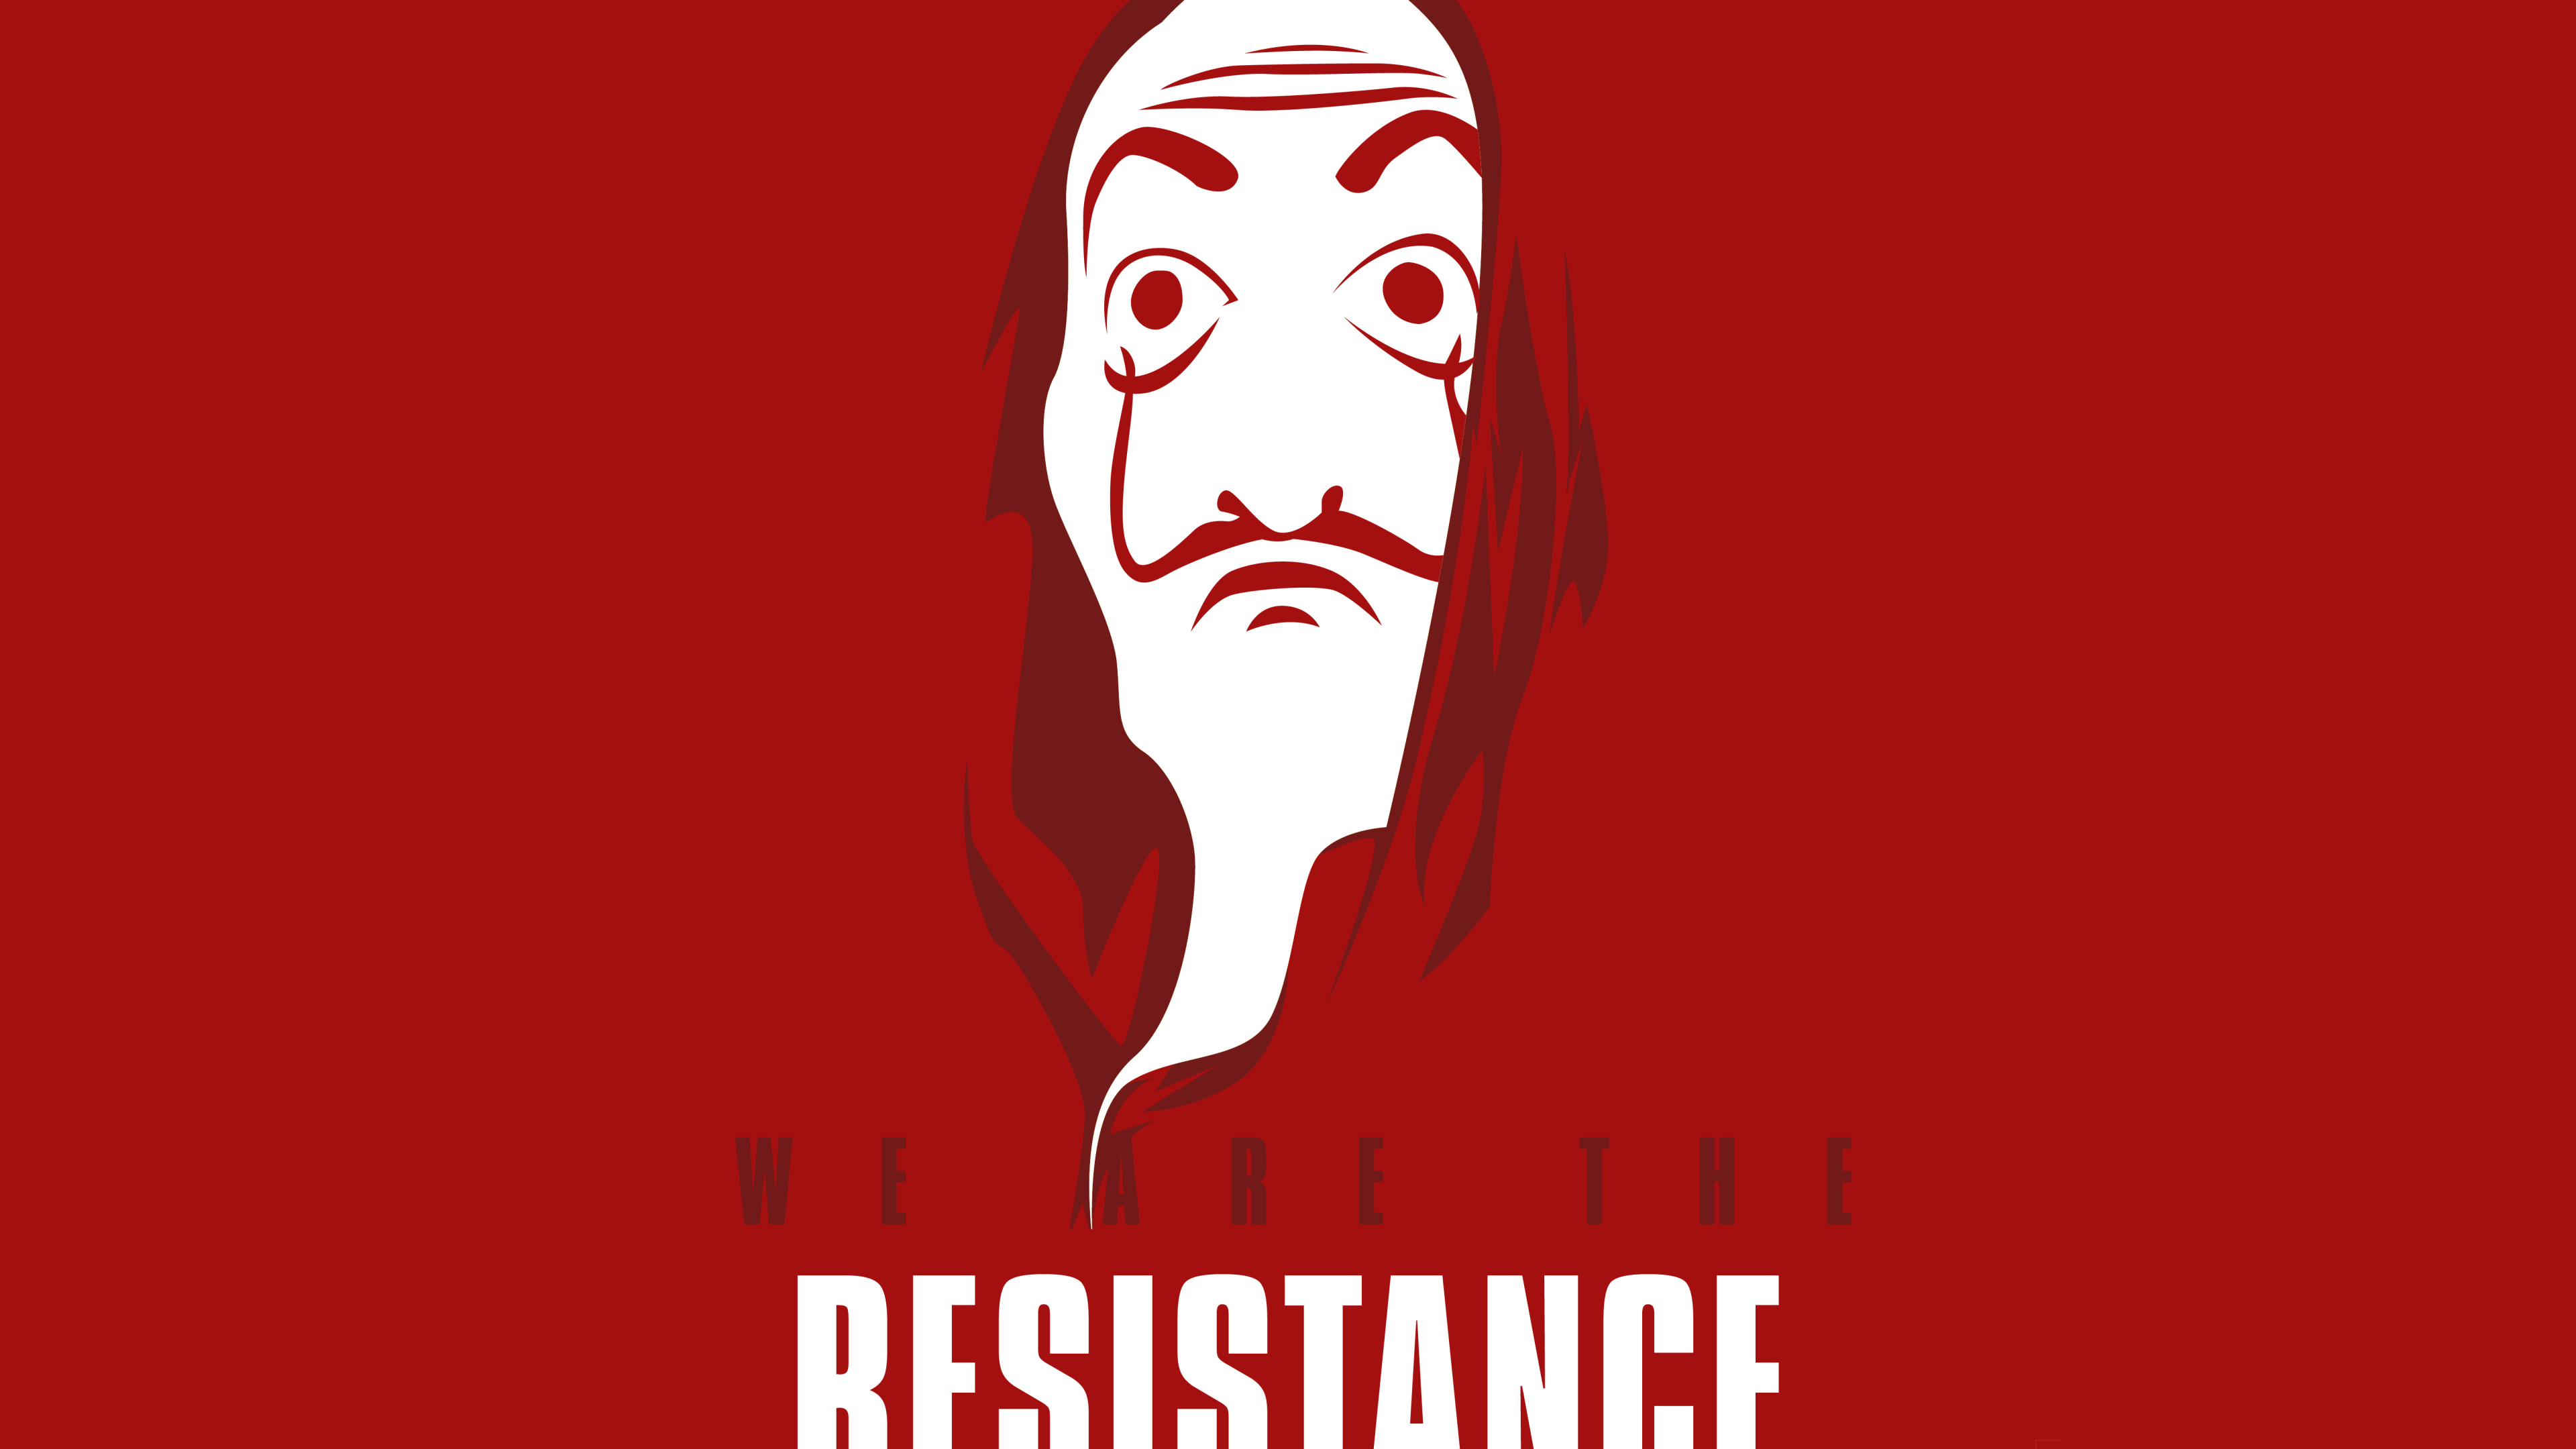 We Are The Resistance 4k Wallpaper HD Minimalist